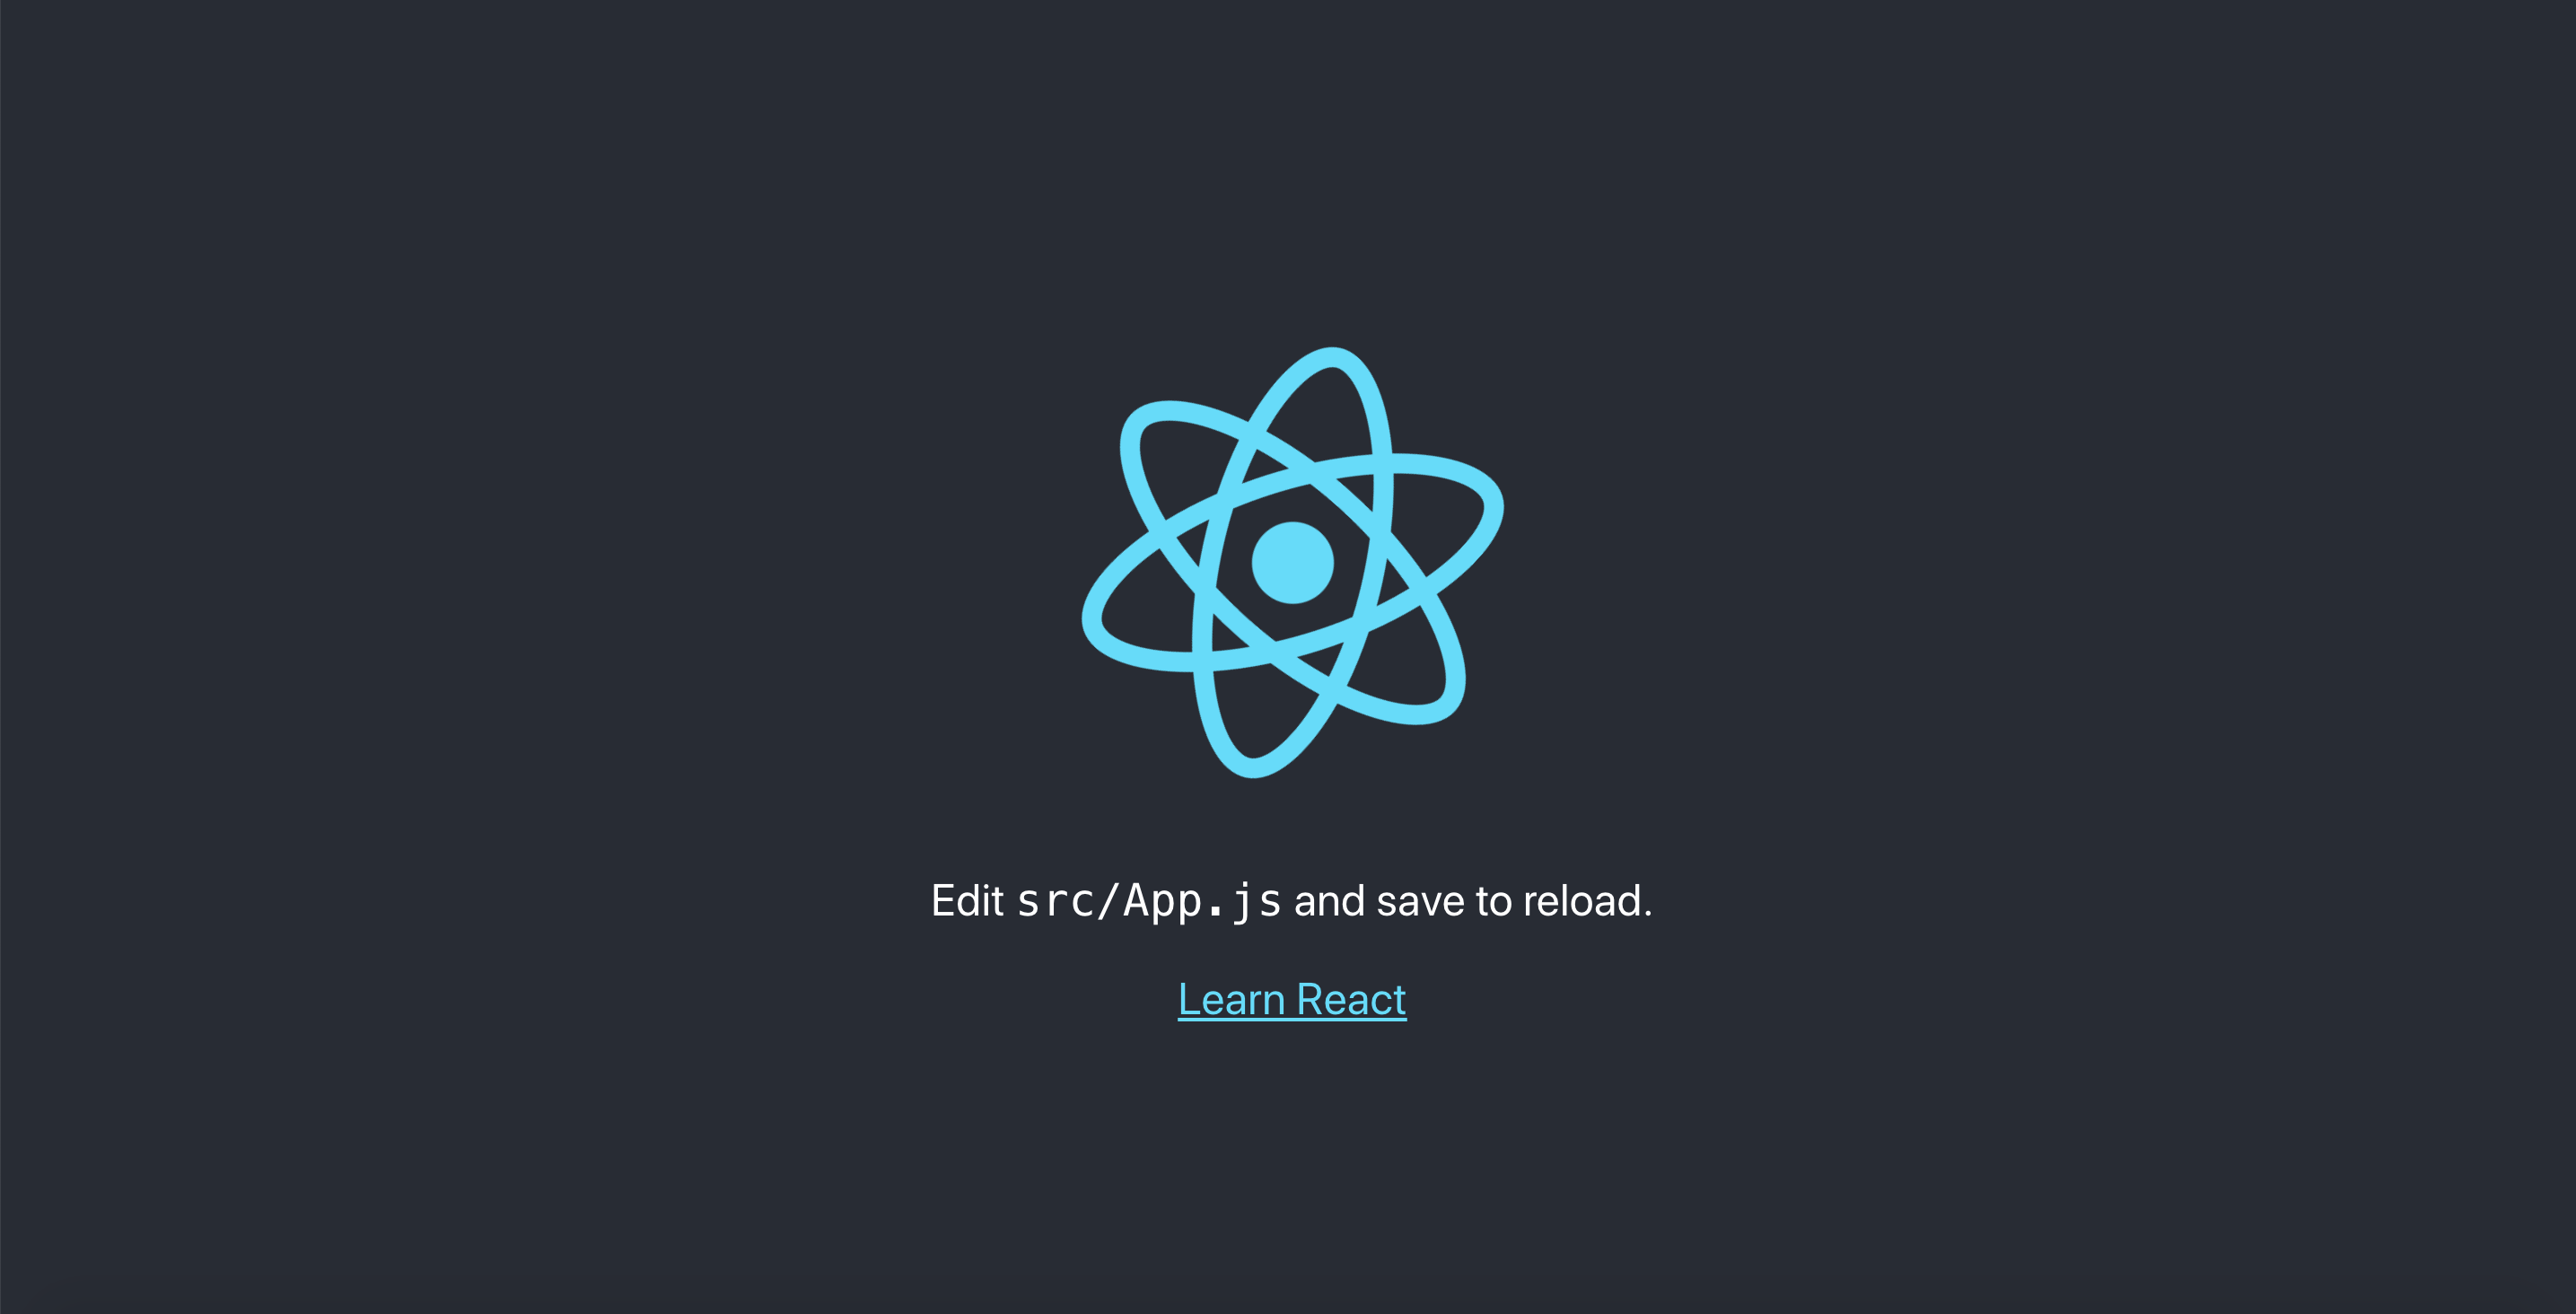 React application started